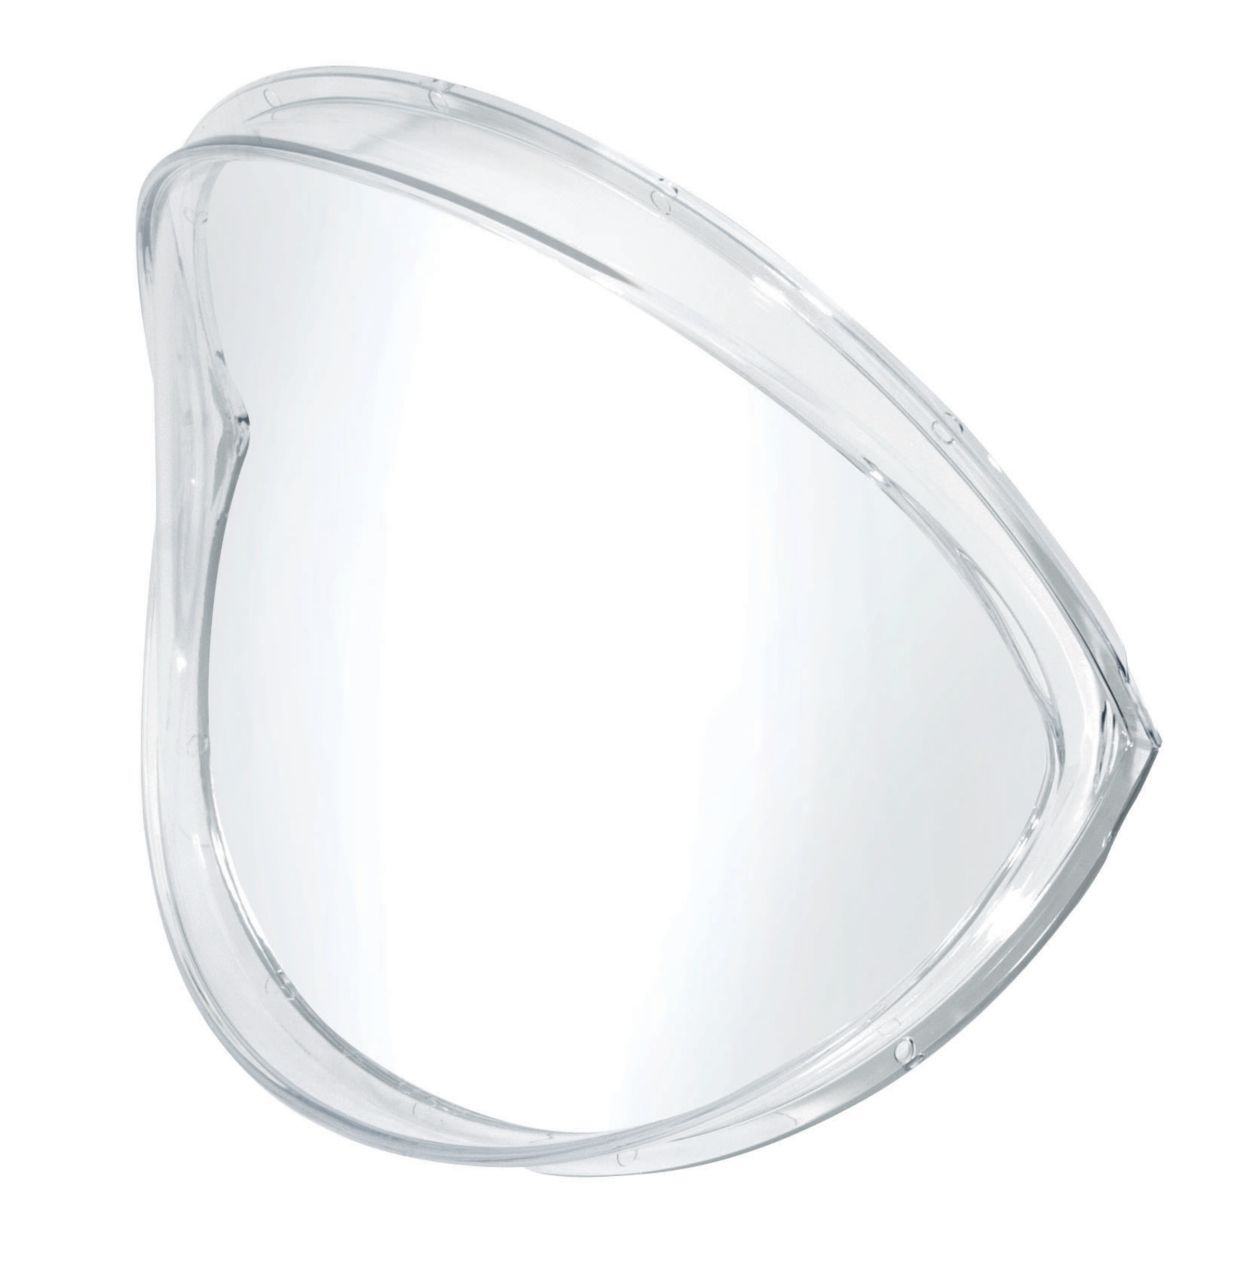 Replacement Lens for 6500 Series Respirator